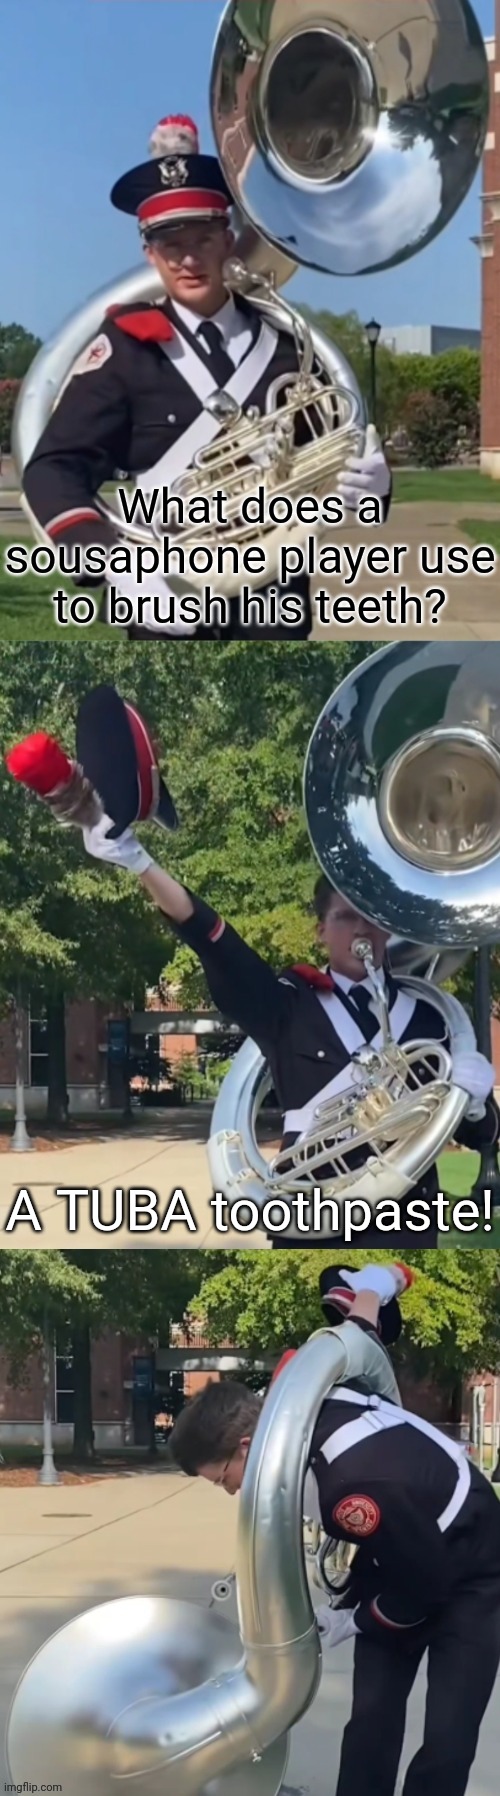 This joke is low...BRASS! | What does a sousaphone player use to brush his teeth? A TUBA toothpaste! | image tagged in ohio state sousaphone bad pun,memes,tuba | made w/ Imgflip meme maker